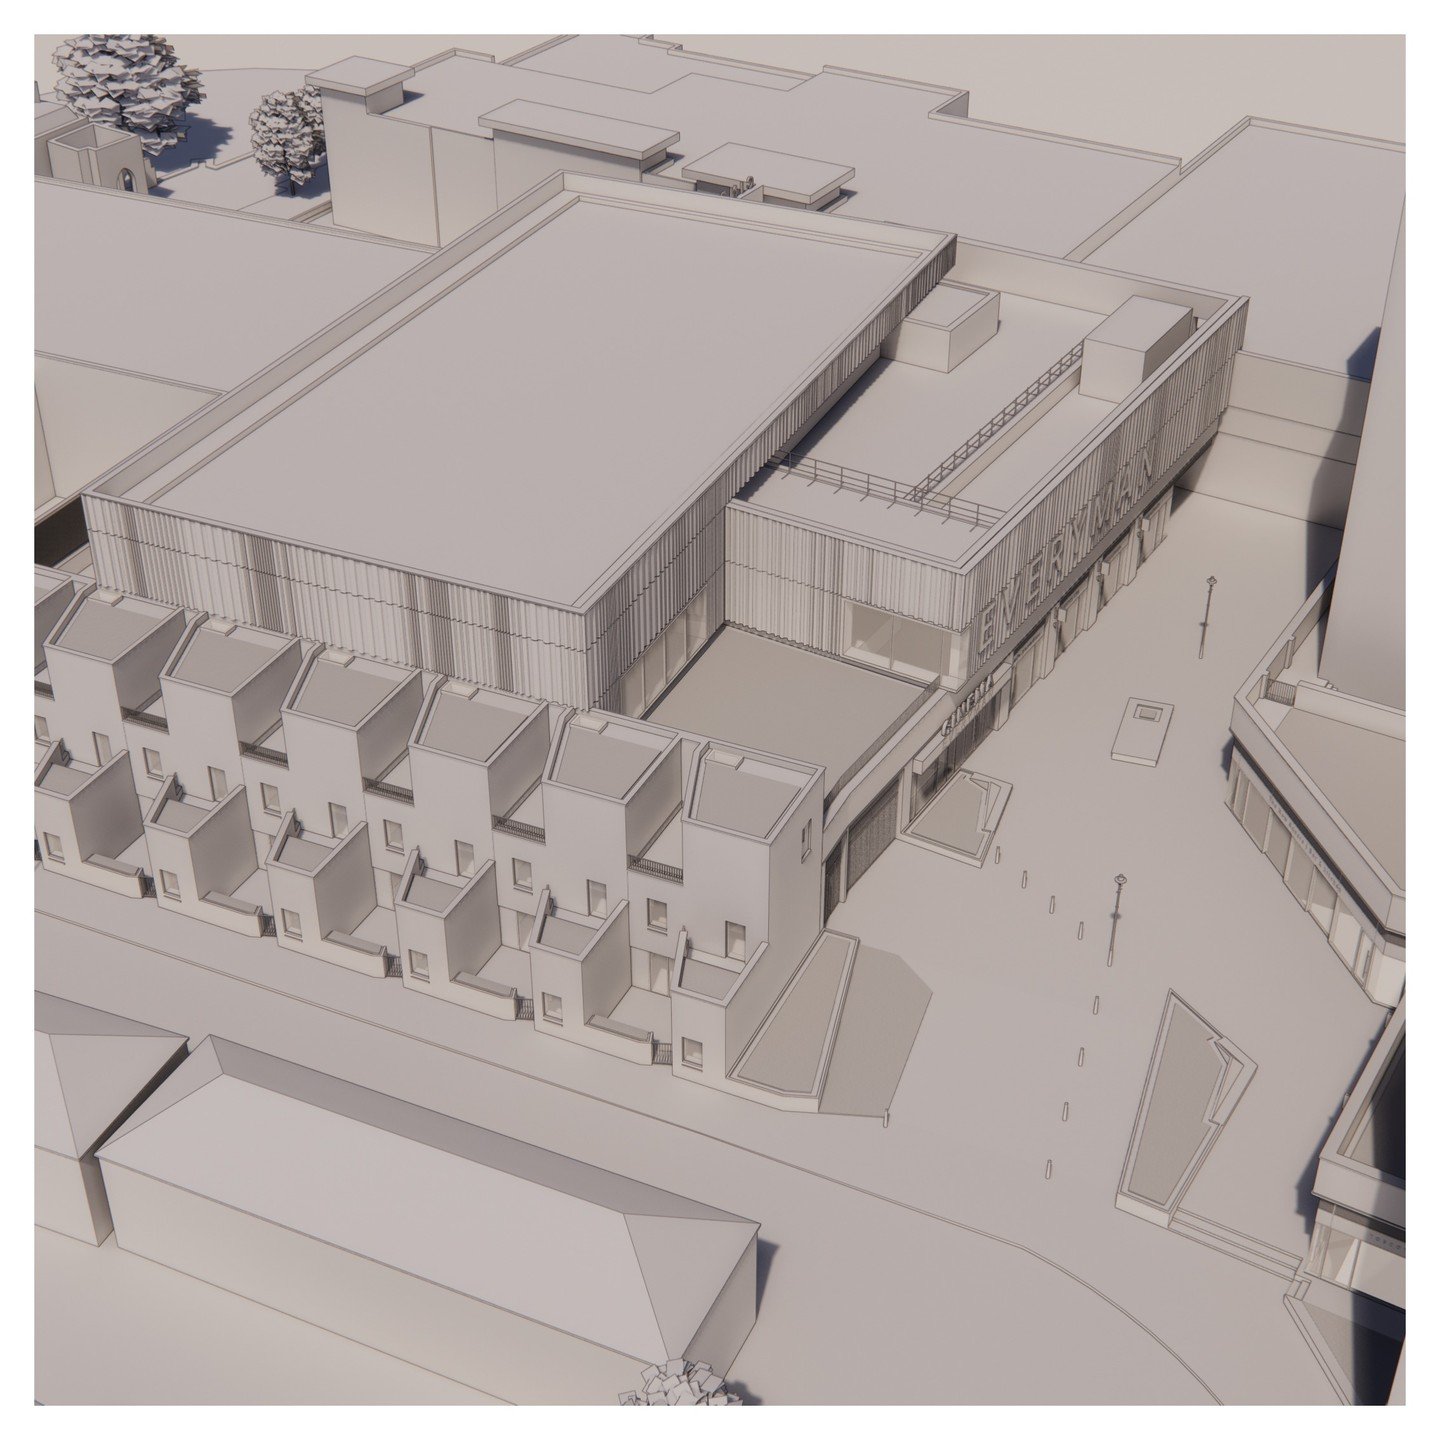 Study model for a town centre regeneration project in Brentwood.

Planning permission received earlier this year.

Mantle Architects director @robbeacock for @tpbennettllp 

#housing #cinema #regeneration #publicspace #architecture